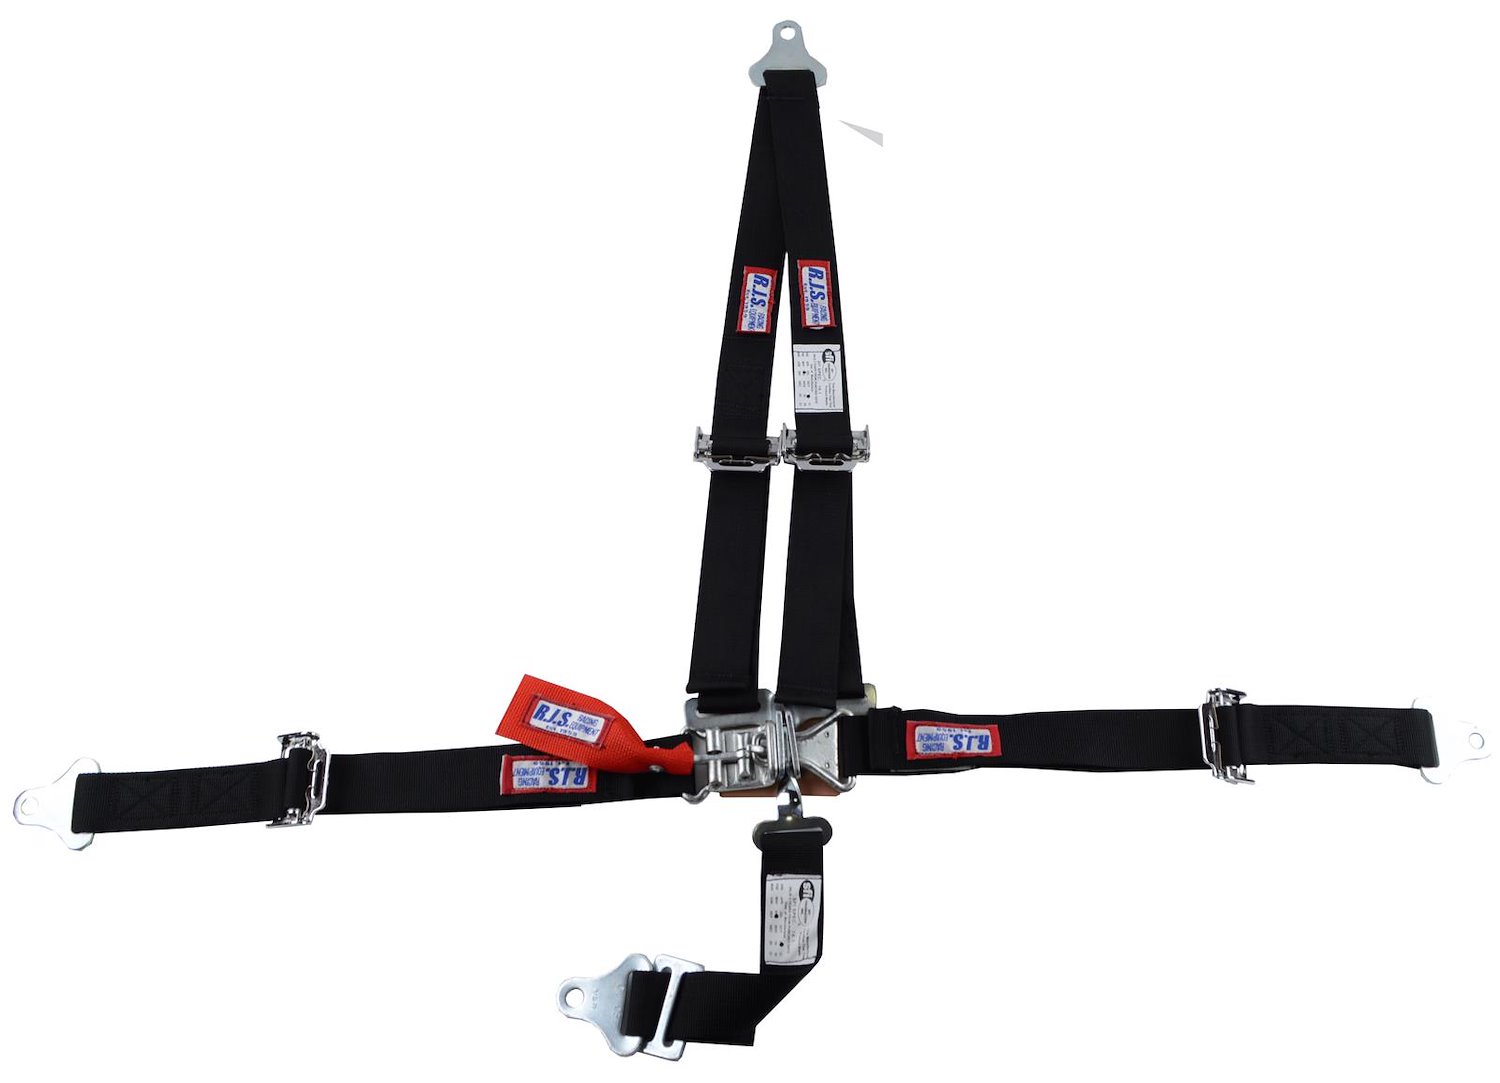 SFI 16.1 CAM-LOCK HARNESS 2 PULL DOWN Lap Belt 2 Shoulder Harness Individual FLOOR Mount 2 SINGLE Sub ALL WRAP ENDS RED